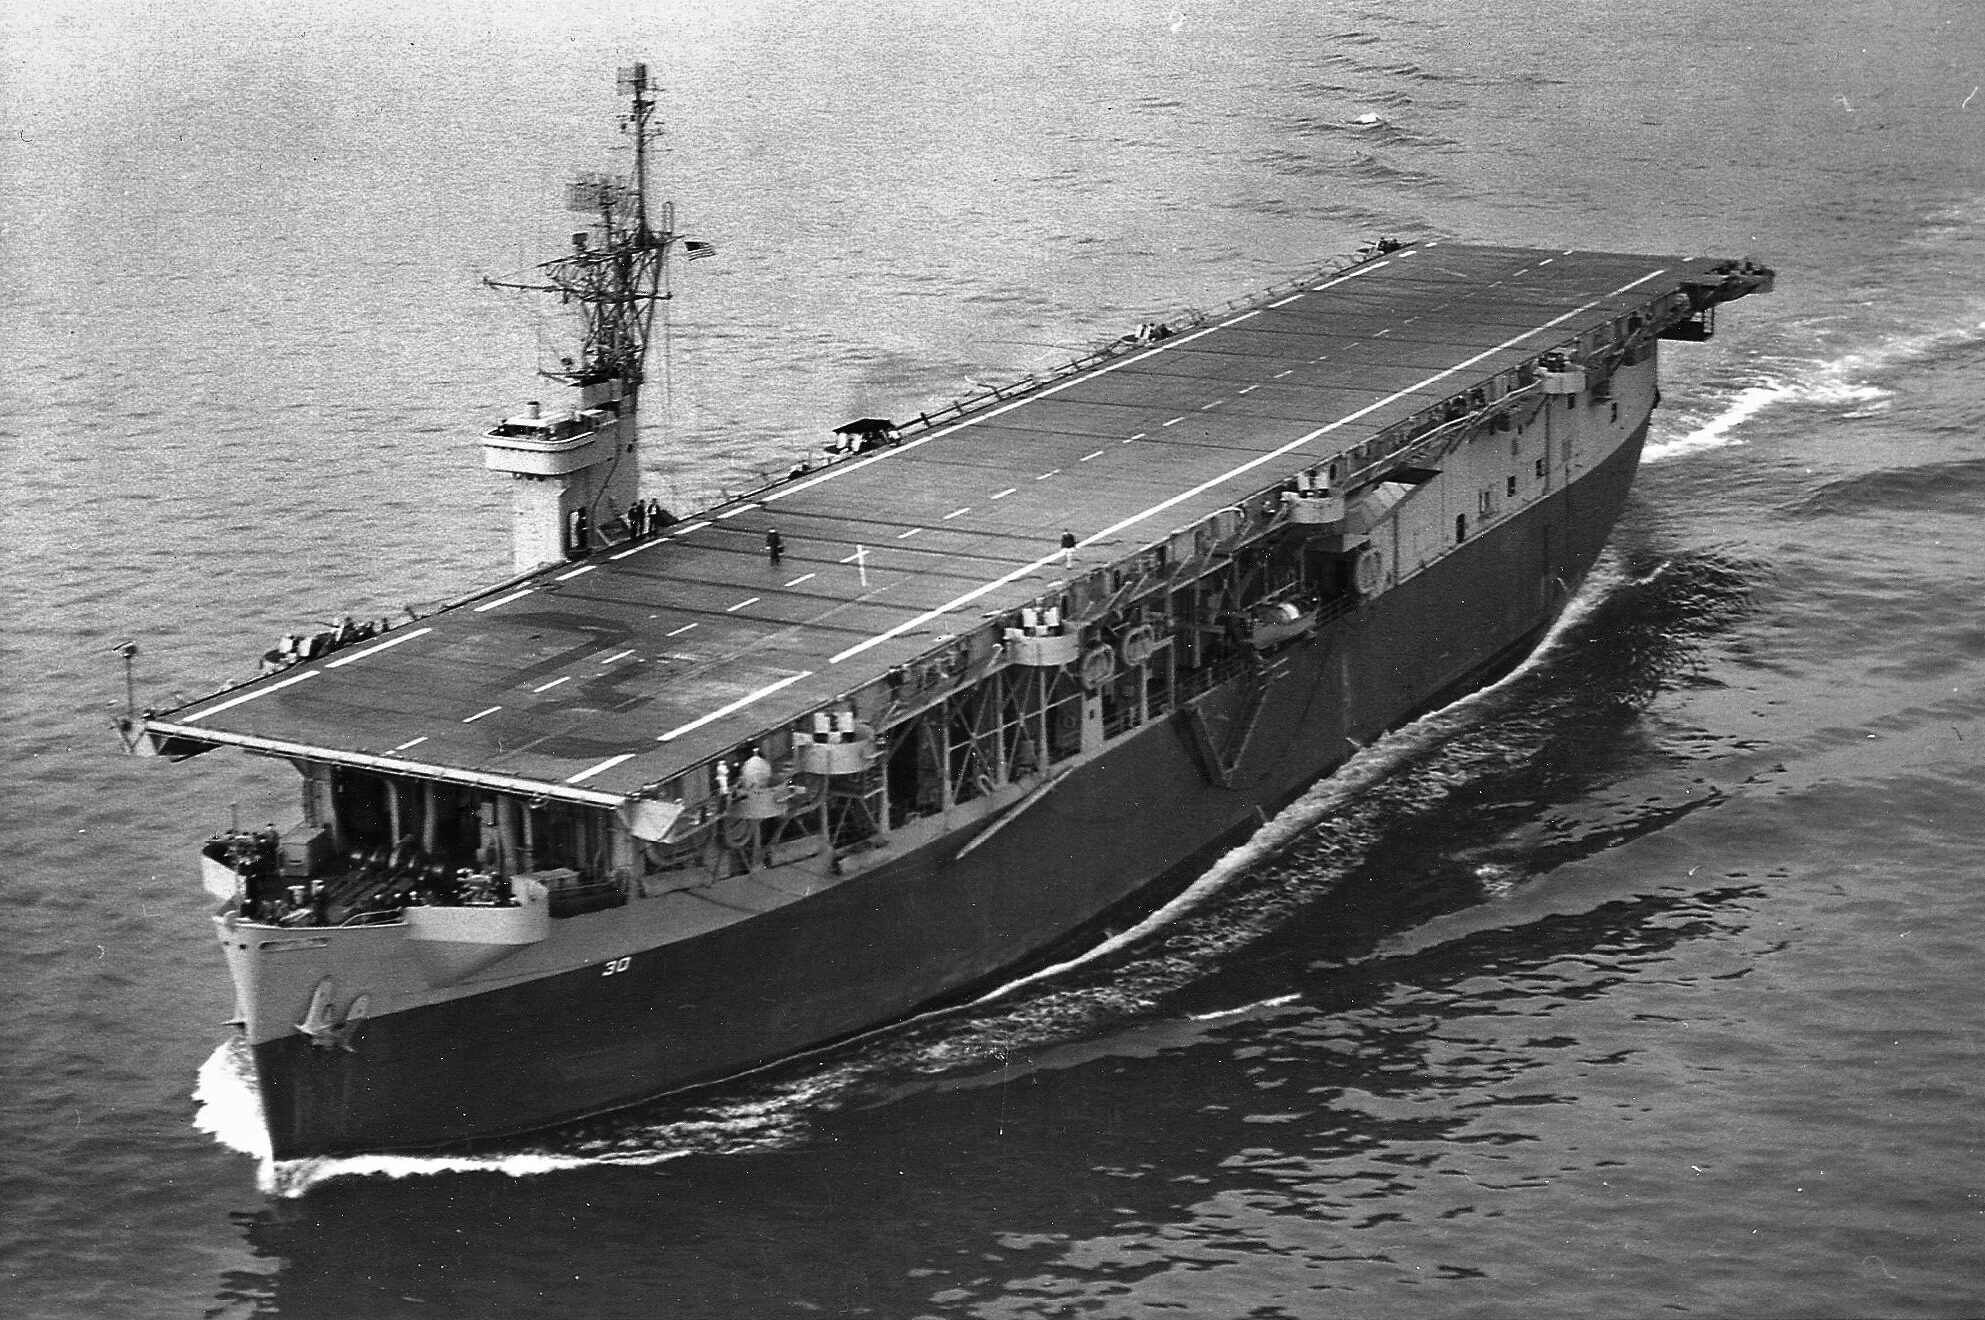 USS Charger, the floating classroom.